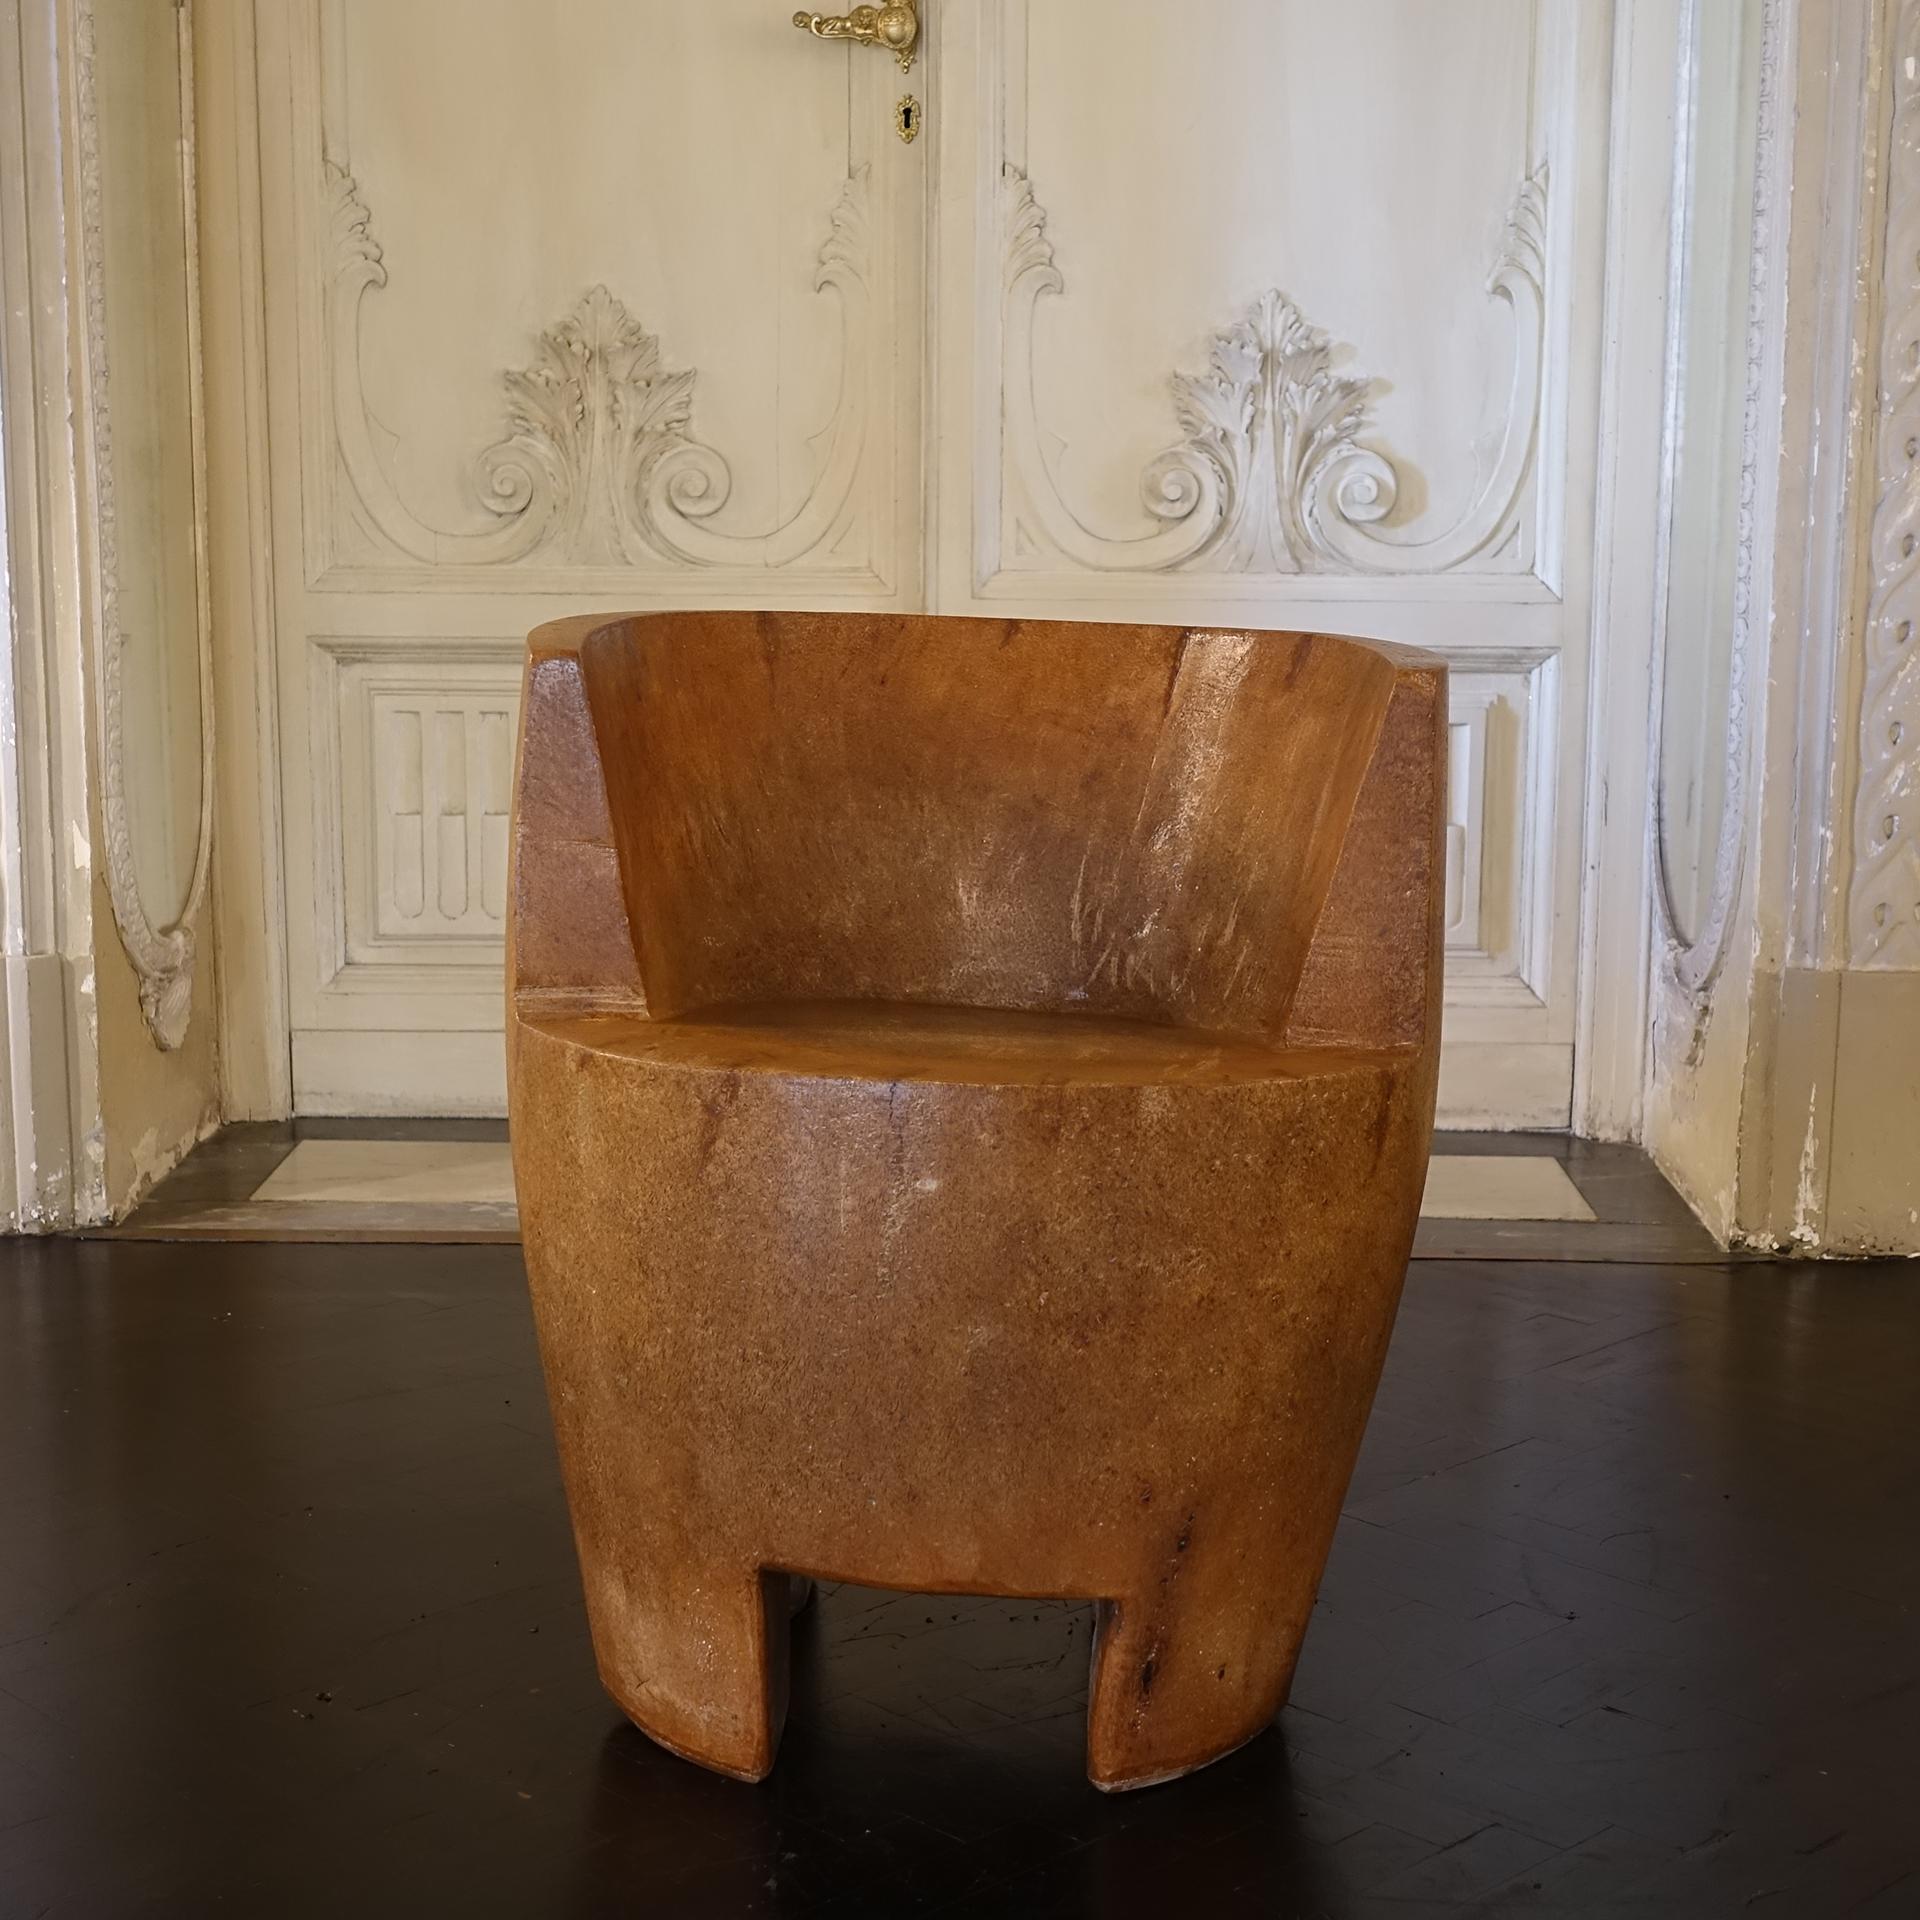 Contemporary hand carved tree stump African chair, perfect for sitting and holding space, decoratively or functionally.